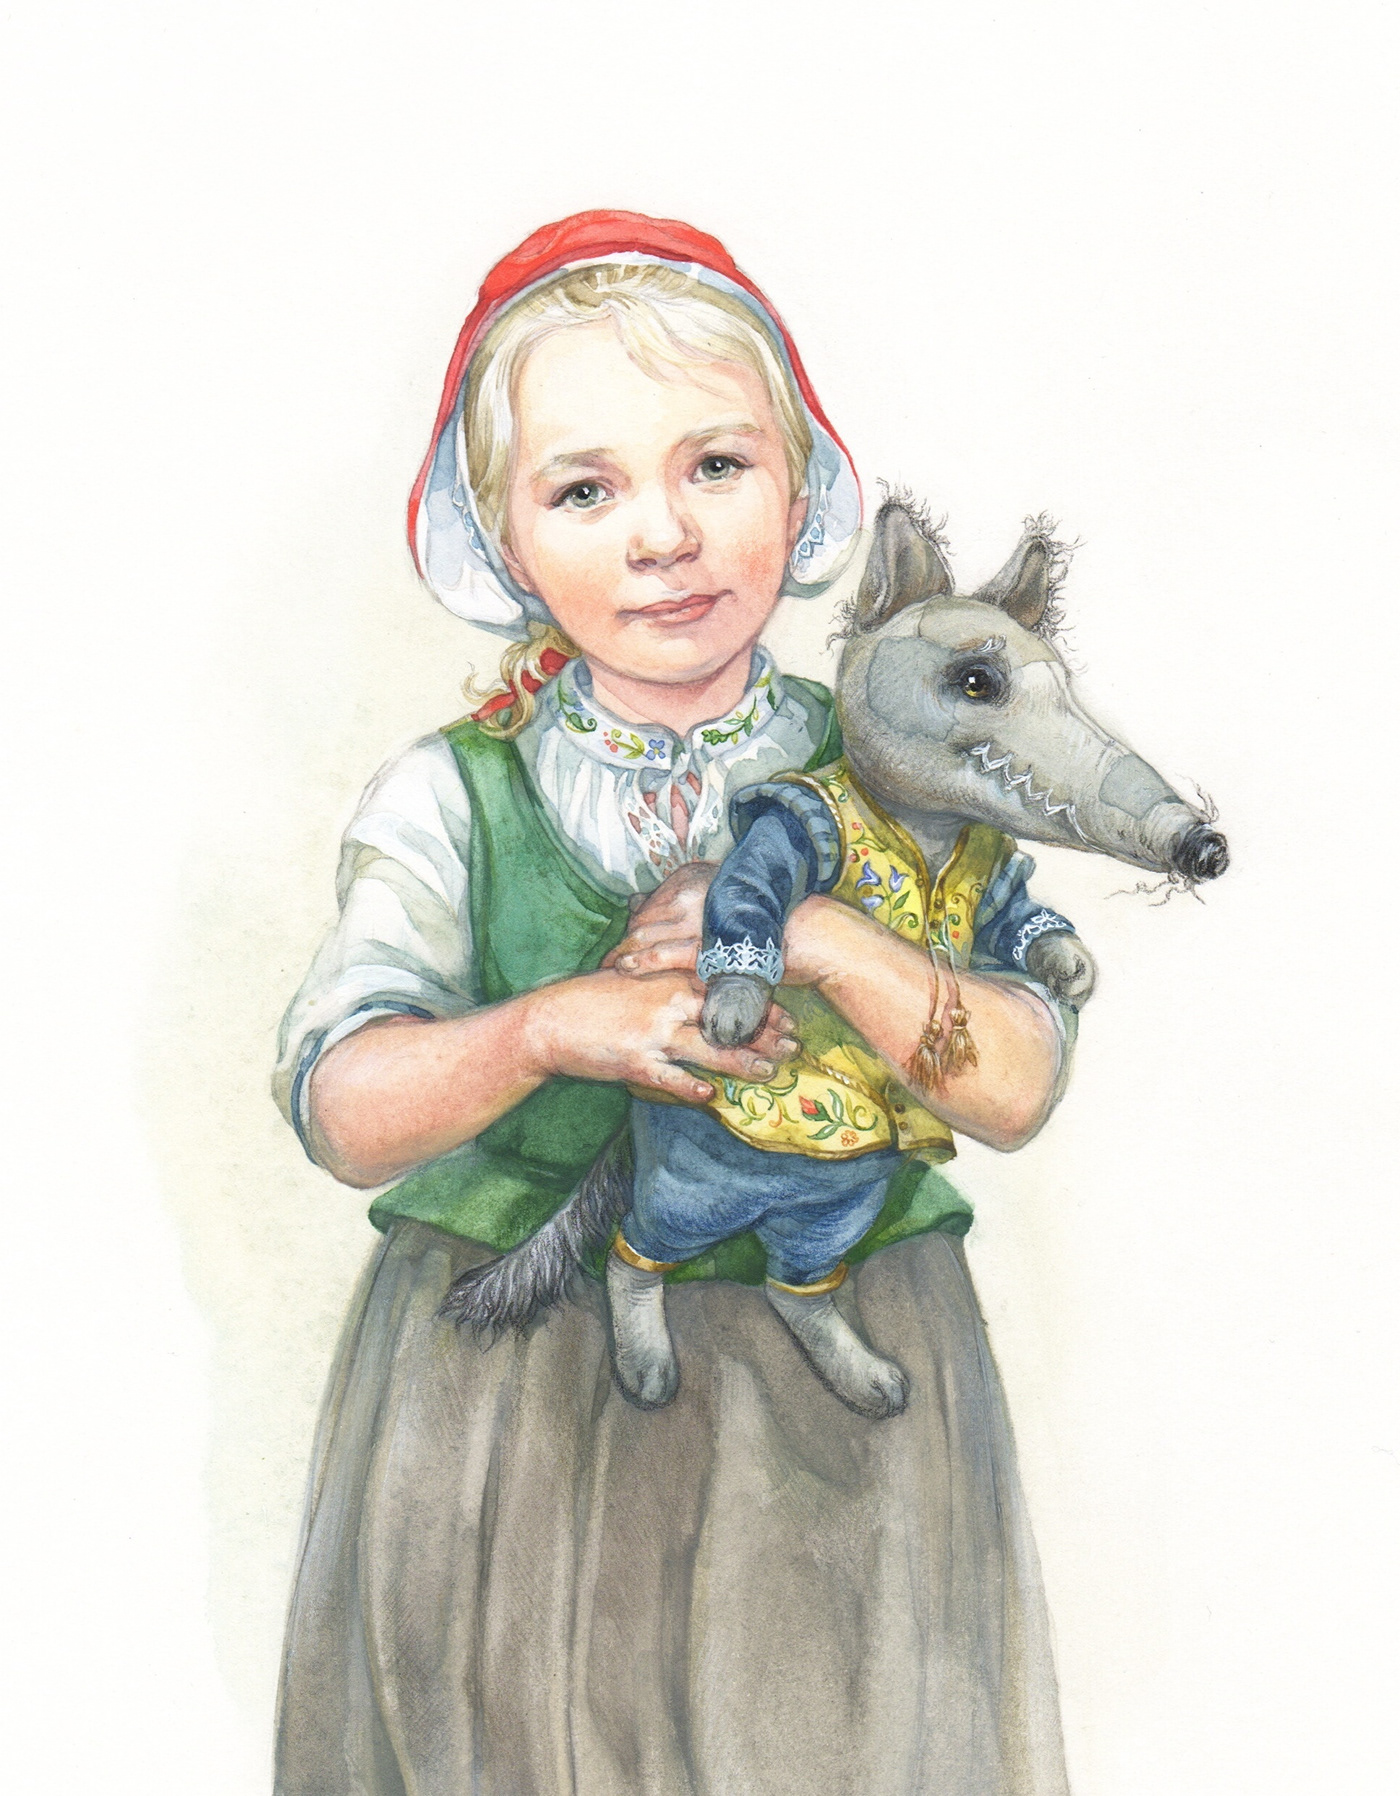 illustration for the fairy tale "Little Red Riding Hood"